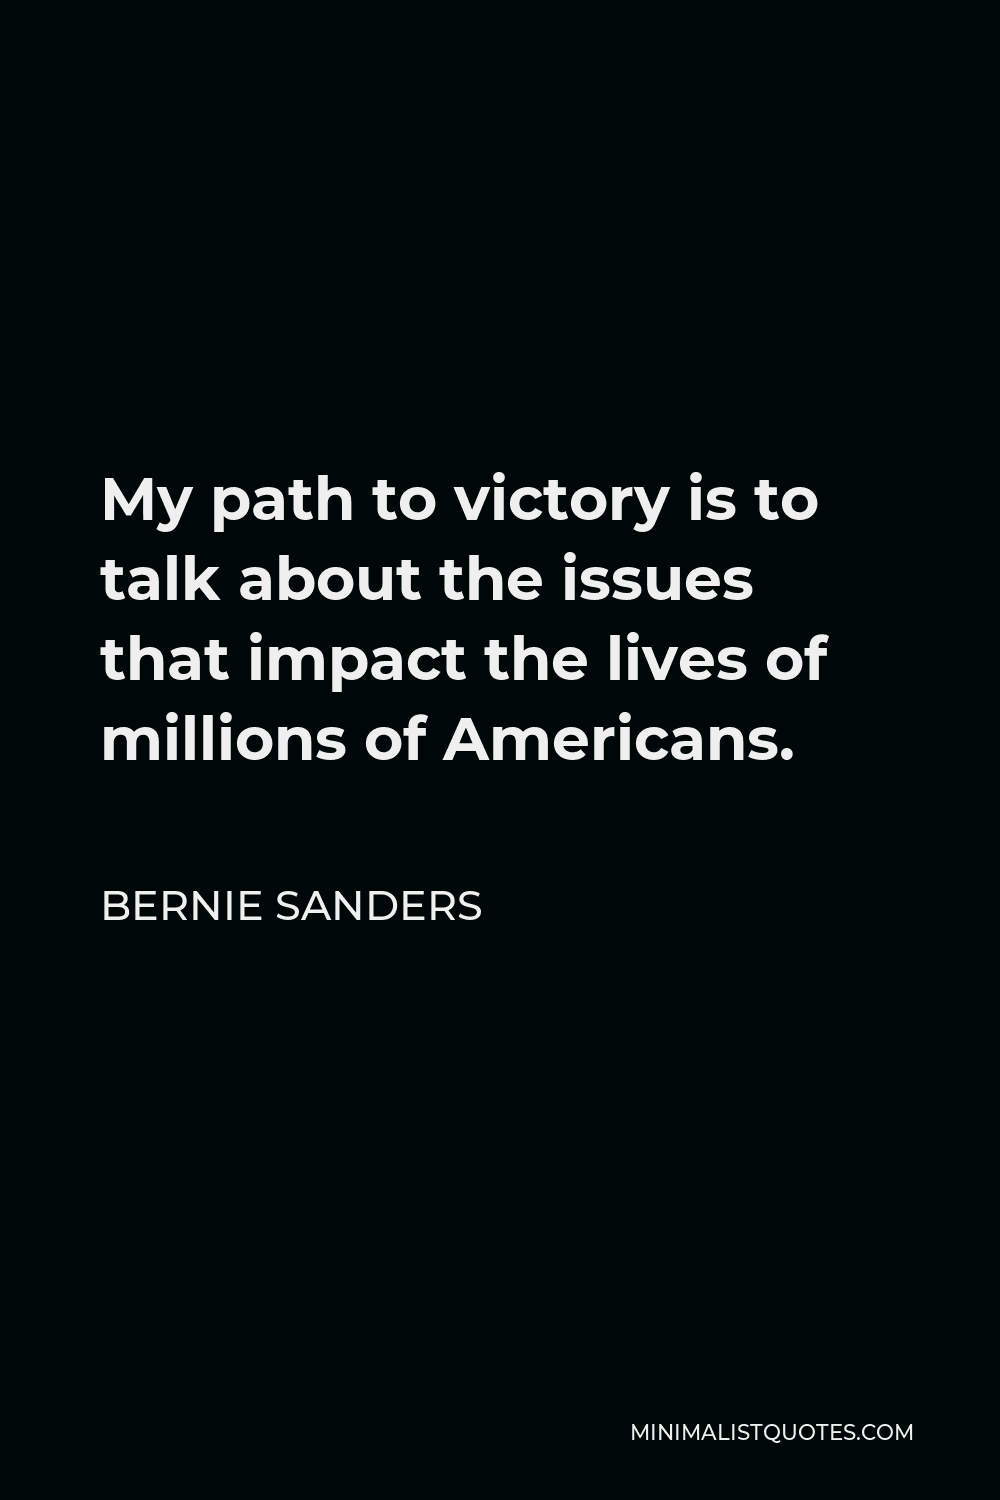 Bernie Sanders Quote - My path to victory is to talk about the issues that impact the lives of millions of Americans.